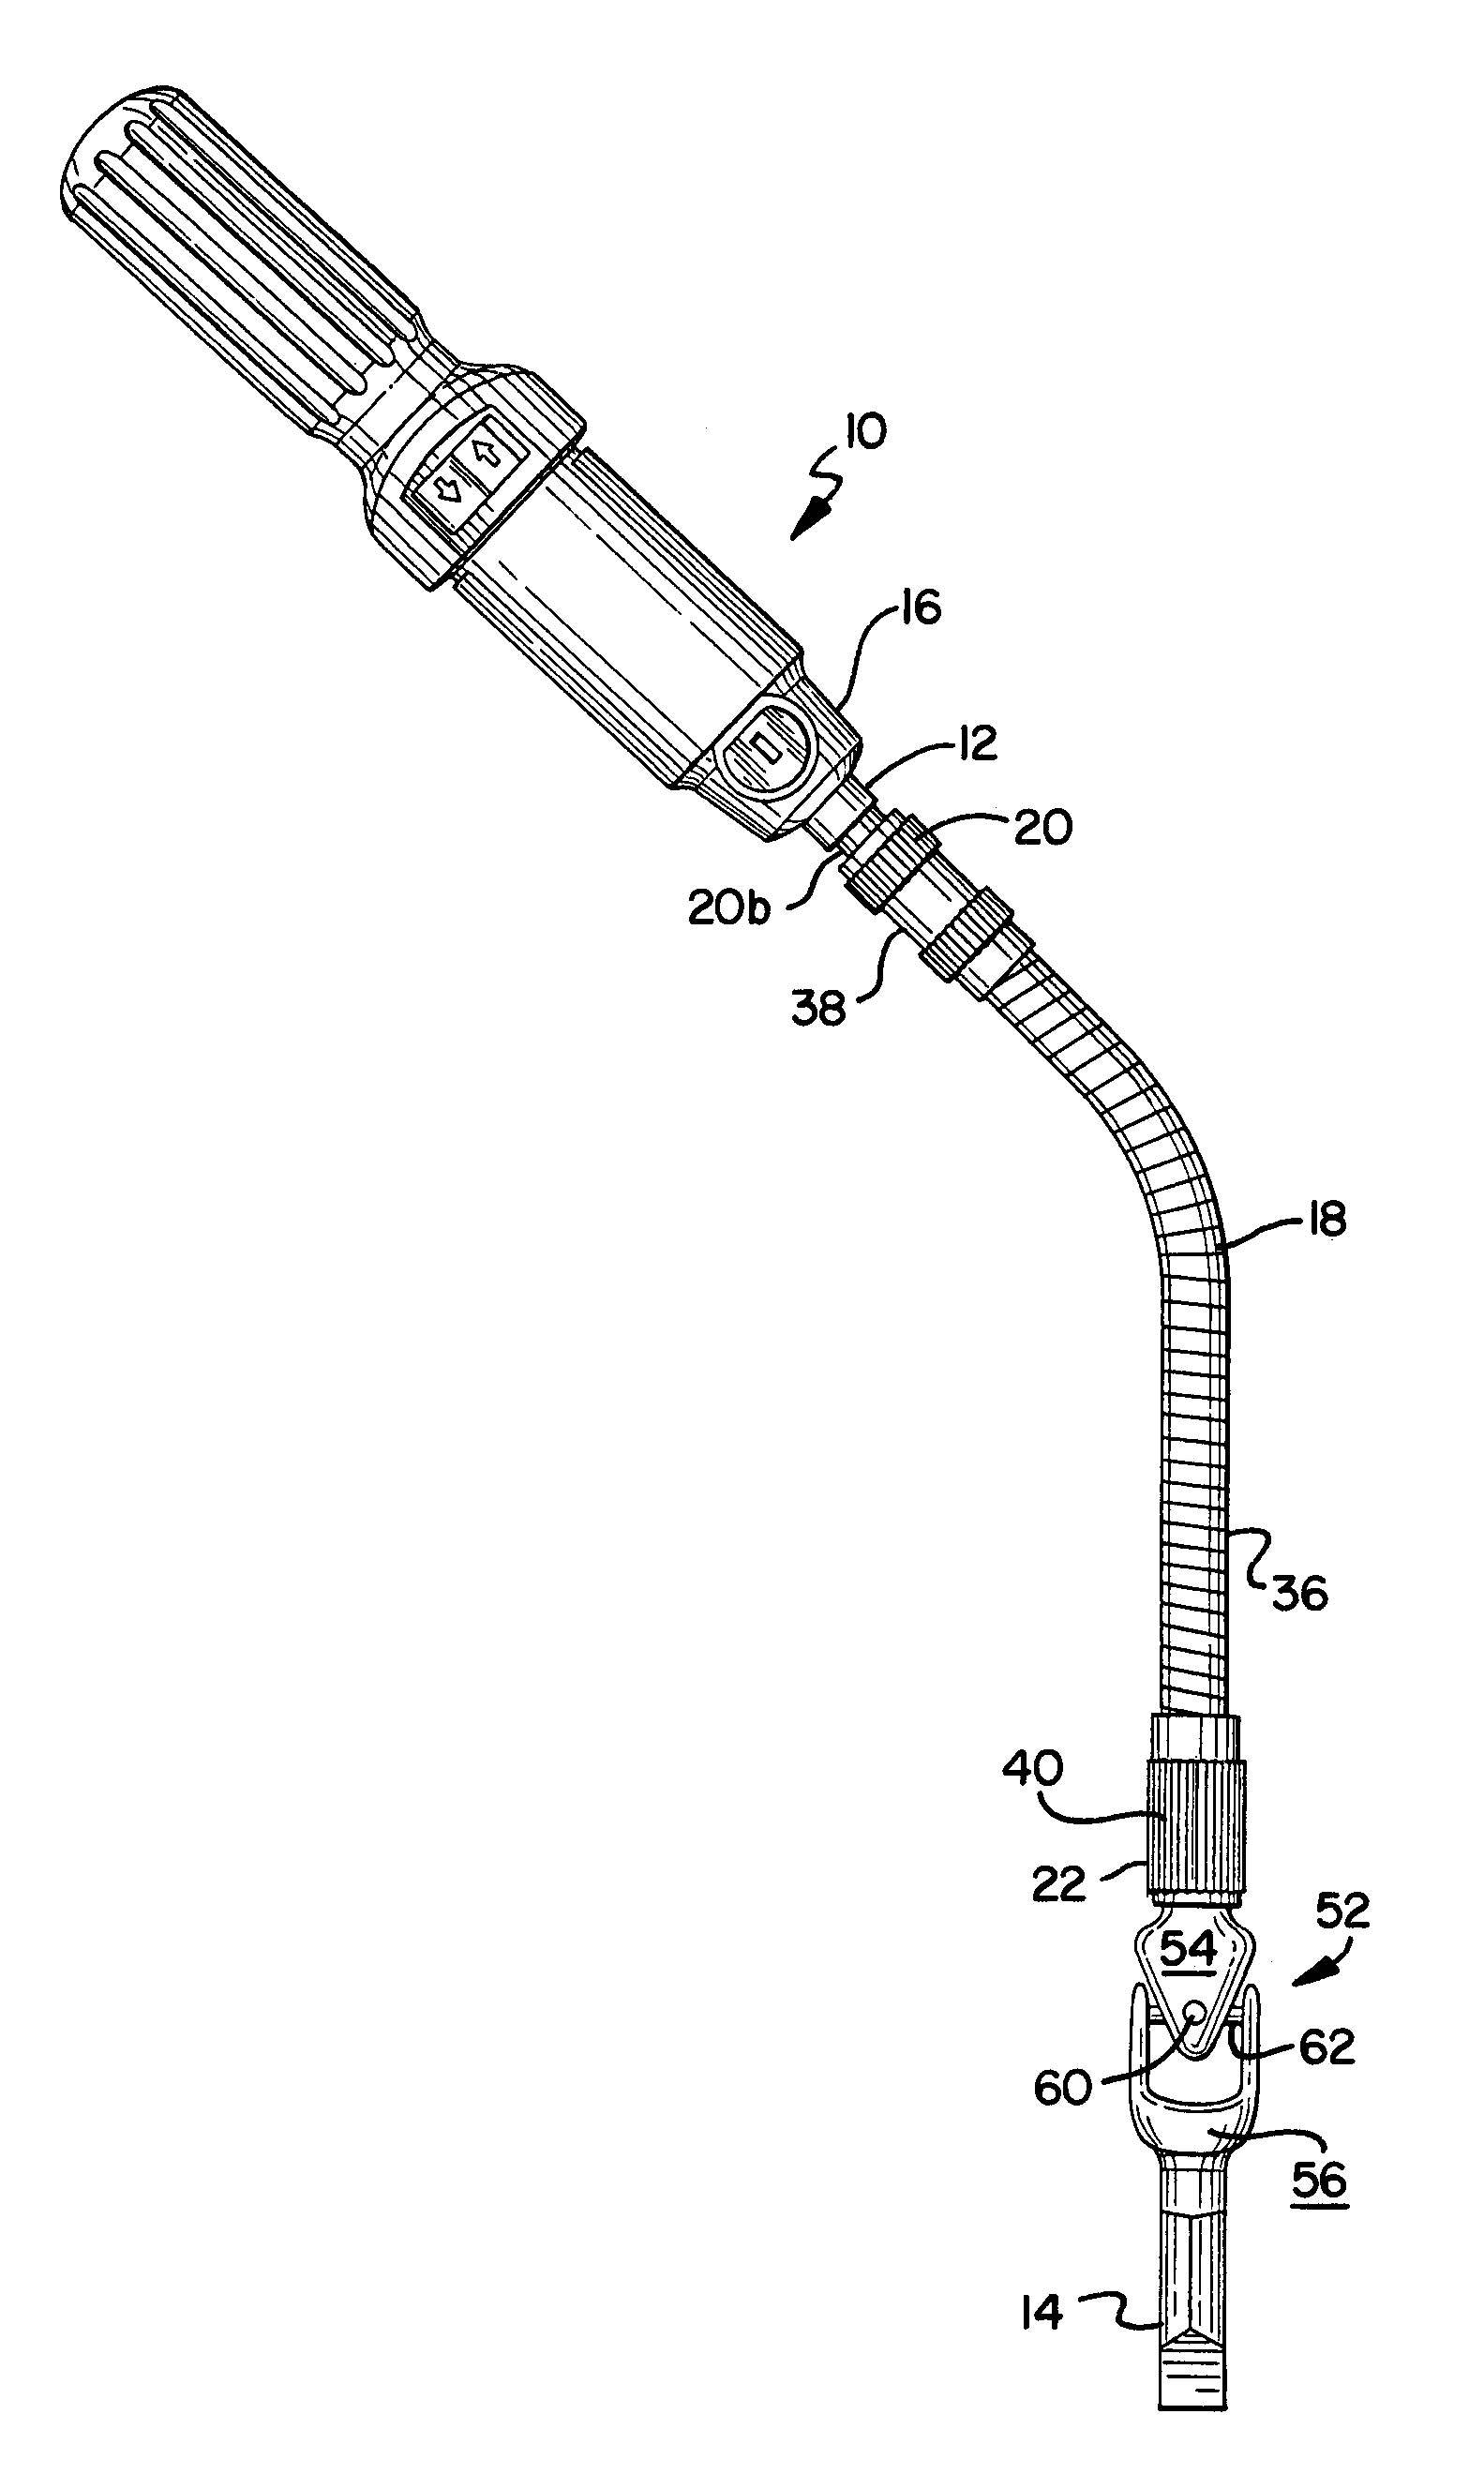 Extension Shaft for Holding a Tool for Rotary Driven Motion